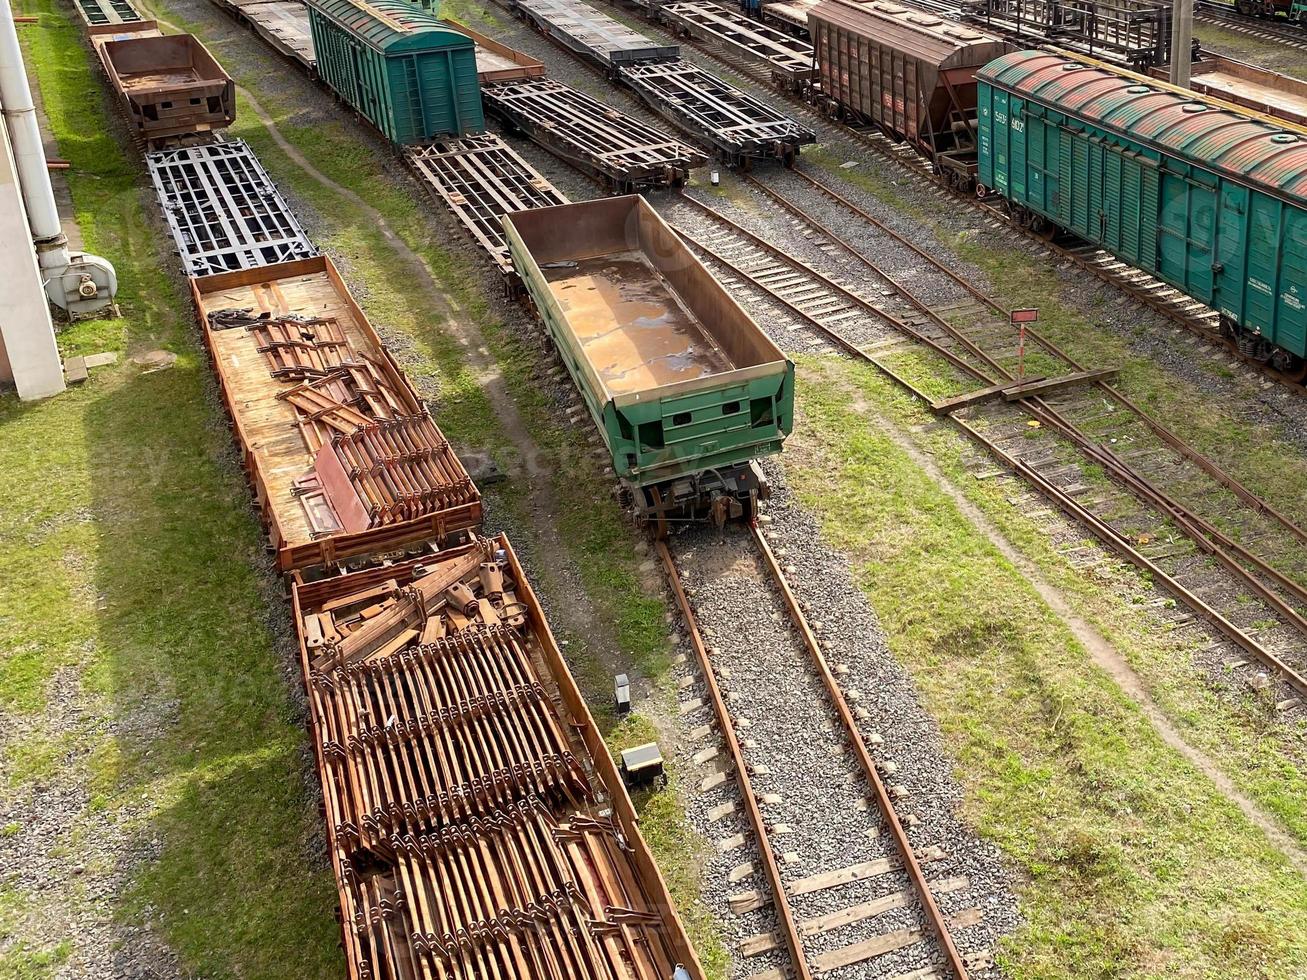 Railway tanks and wagons waiting for their turn for loading and unloading photo